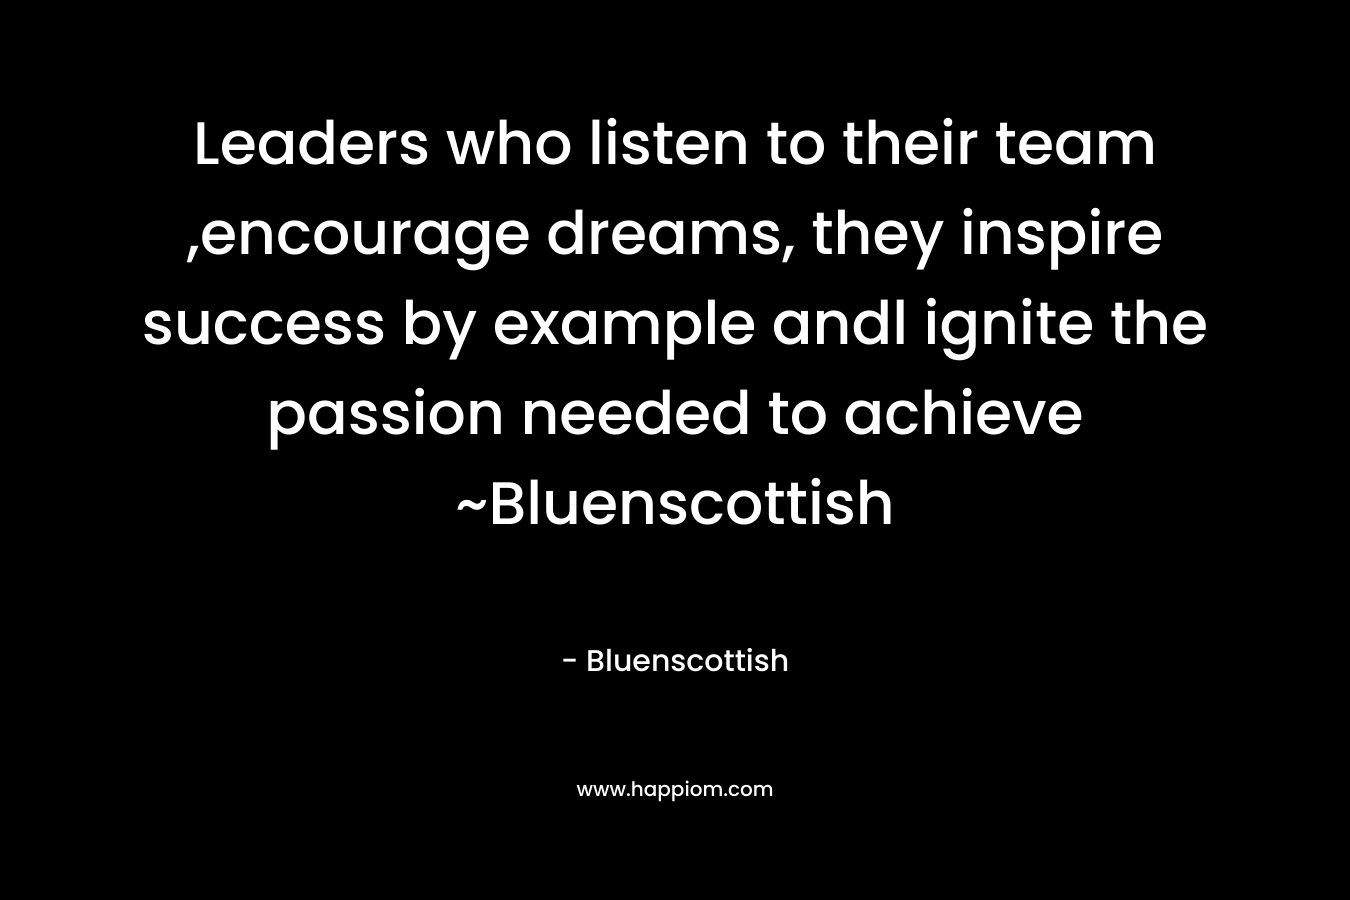 Leaders who listen to their team ,encourage dreams, they inspire success by example andl ignite the passion needed to achieve ~Bluenscottish